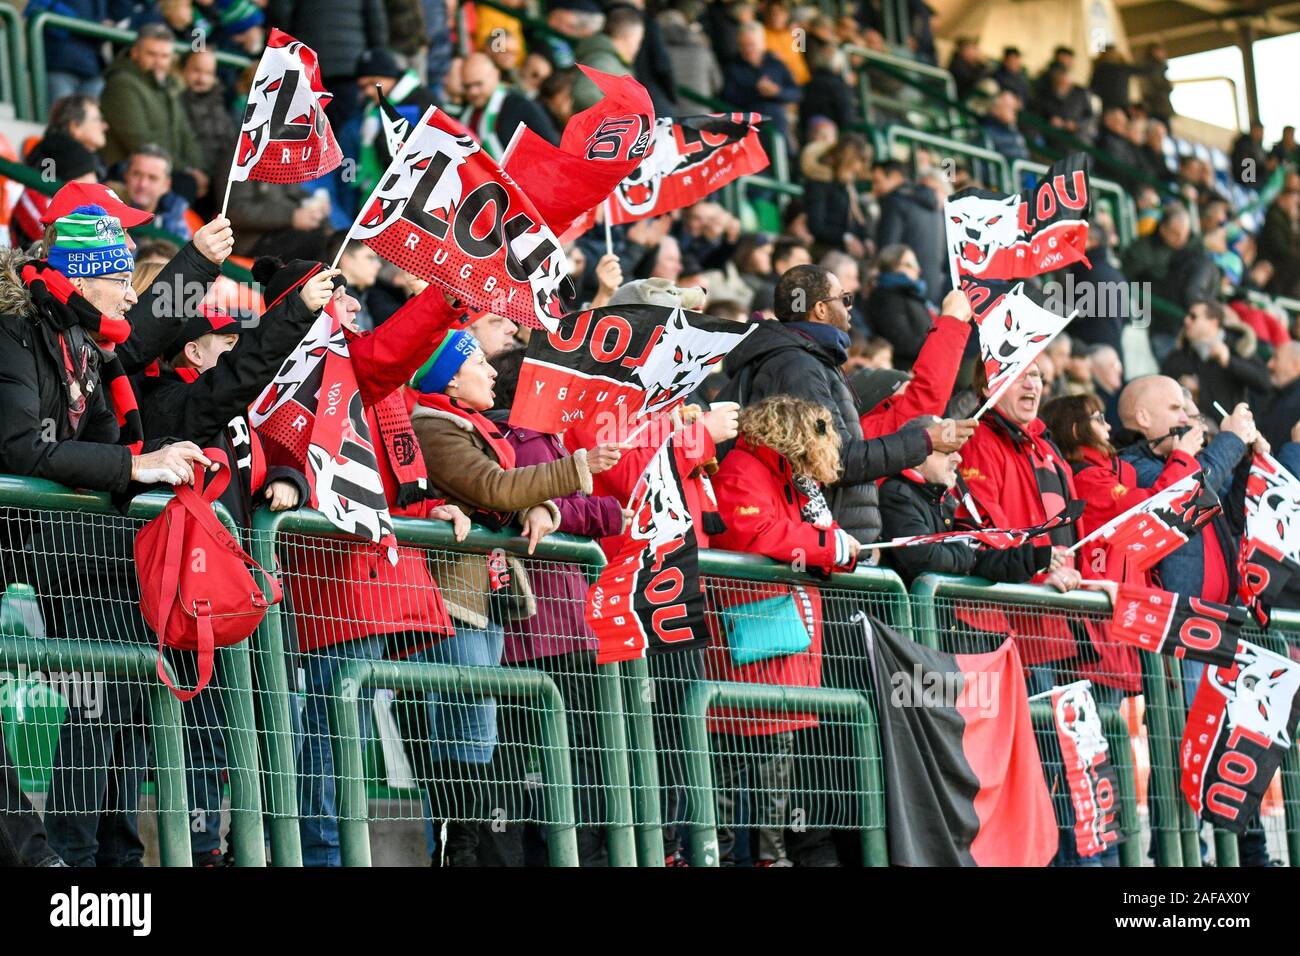 Treviso, Italy. 14th Dec, 2019. fans lyonduring Benetton Treviso vs Lyon, Rugby Heineken Champions Cup in Treviso, Italy, December 14 2019 - LPS/Ettore Griffoni Credit: Ettore Griffoni/LPS/ZUMA Wire/Alamy Live News Stock Photo